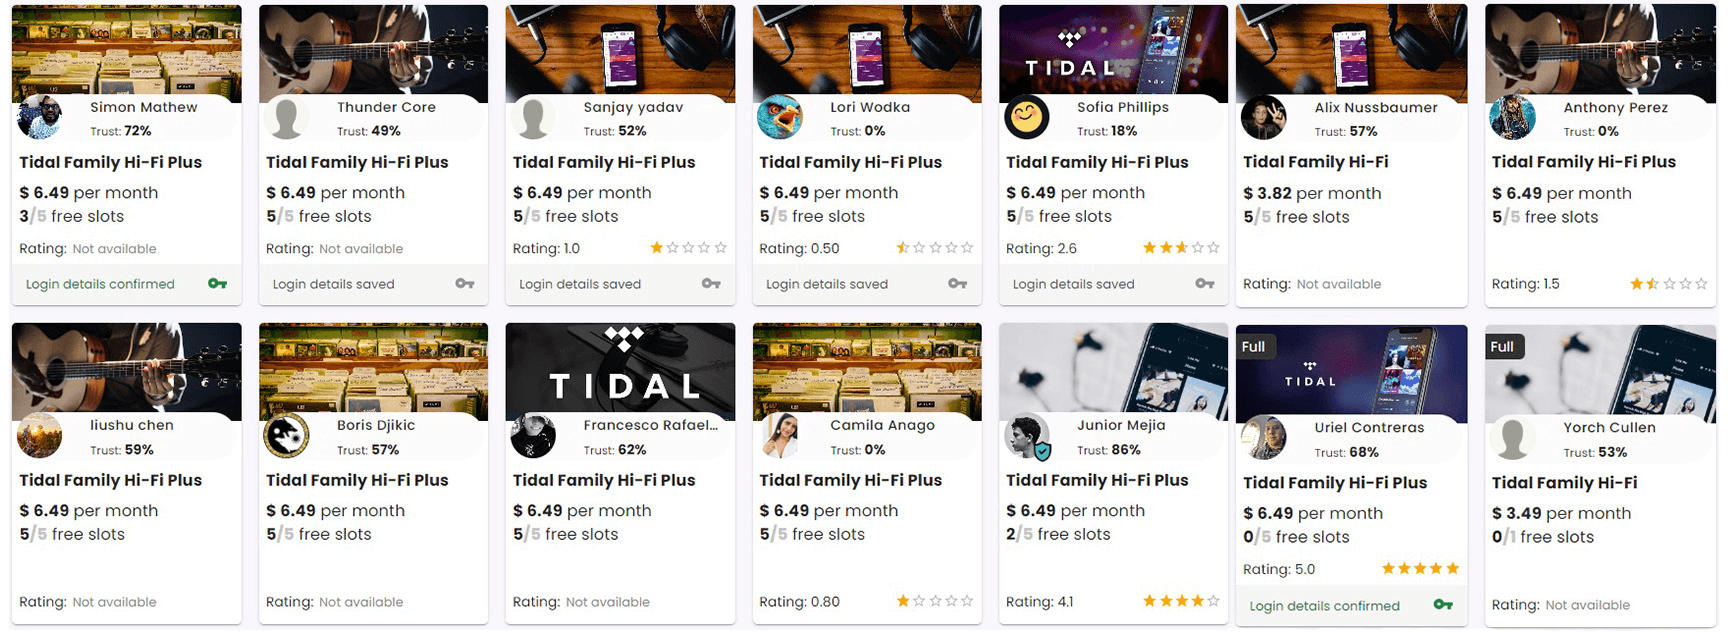 Become an Admin on Together Price and share your subscription with other 5 people to save more than 80% of the cost of Tidal Hi-Fi Family Plus.